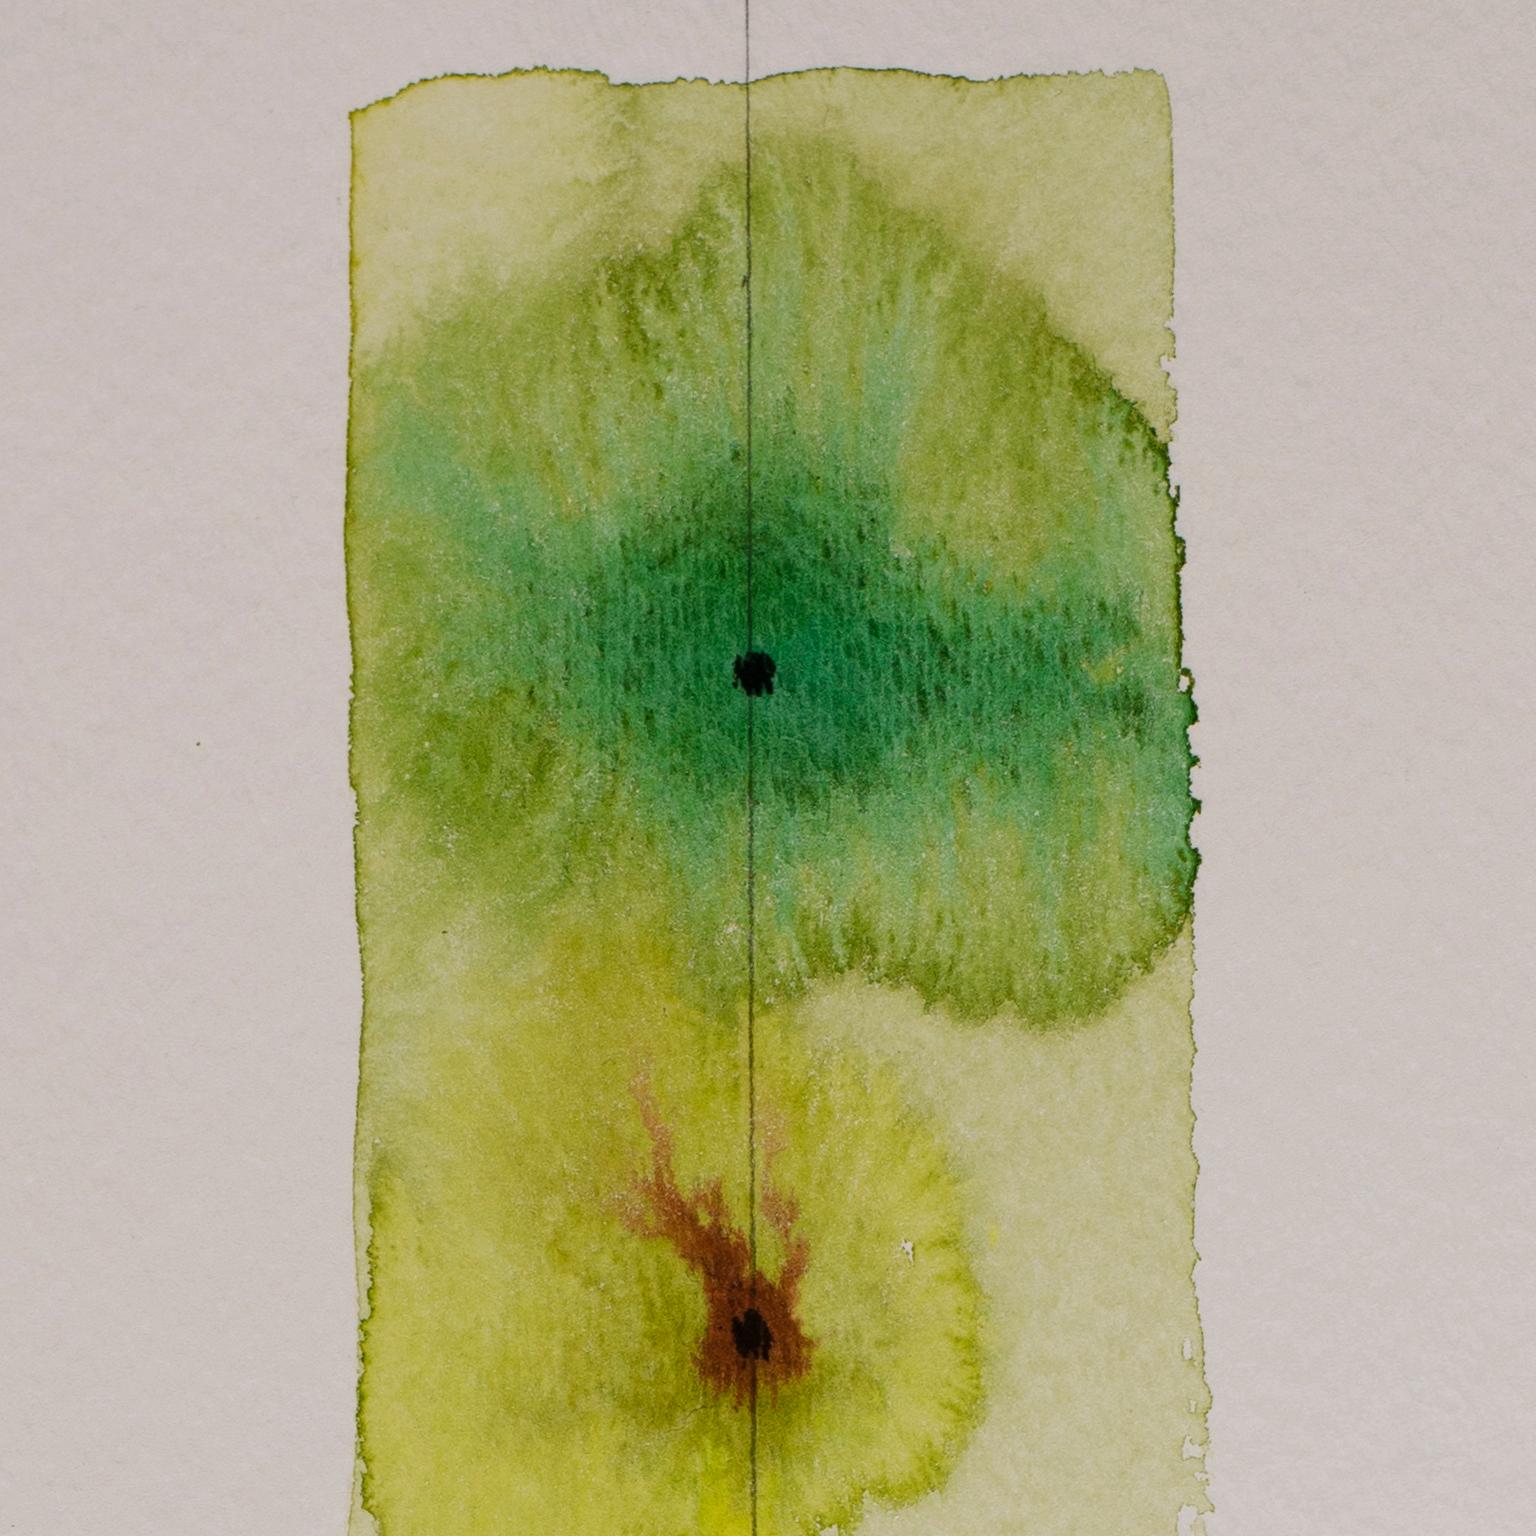 Totem 001 by Lori Fox. Green and yellow hues abstract watercolor and graphite For Sale 2